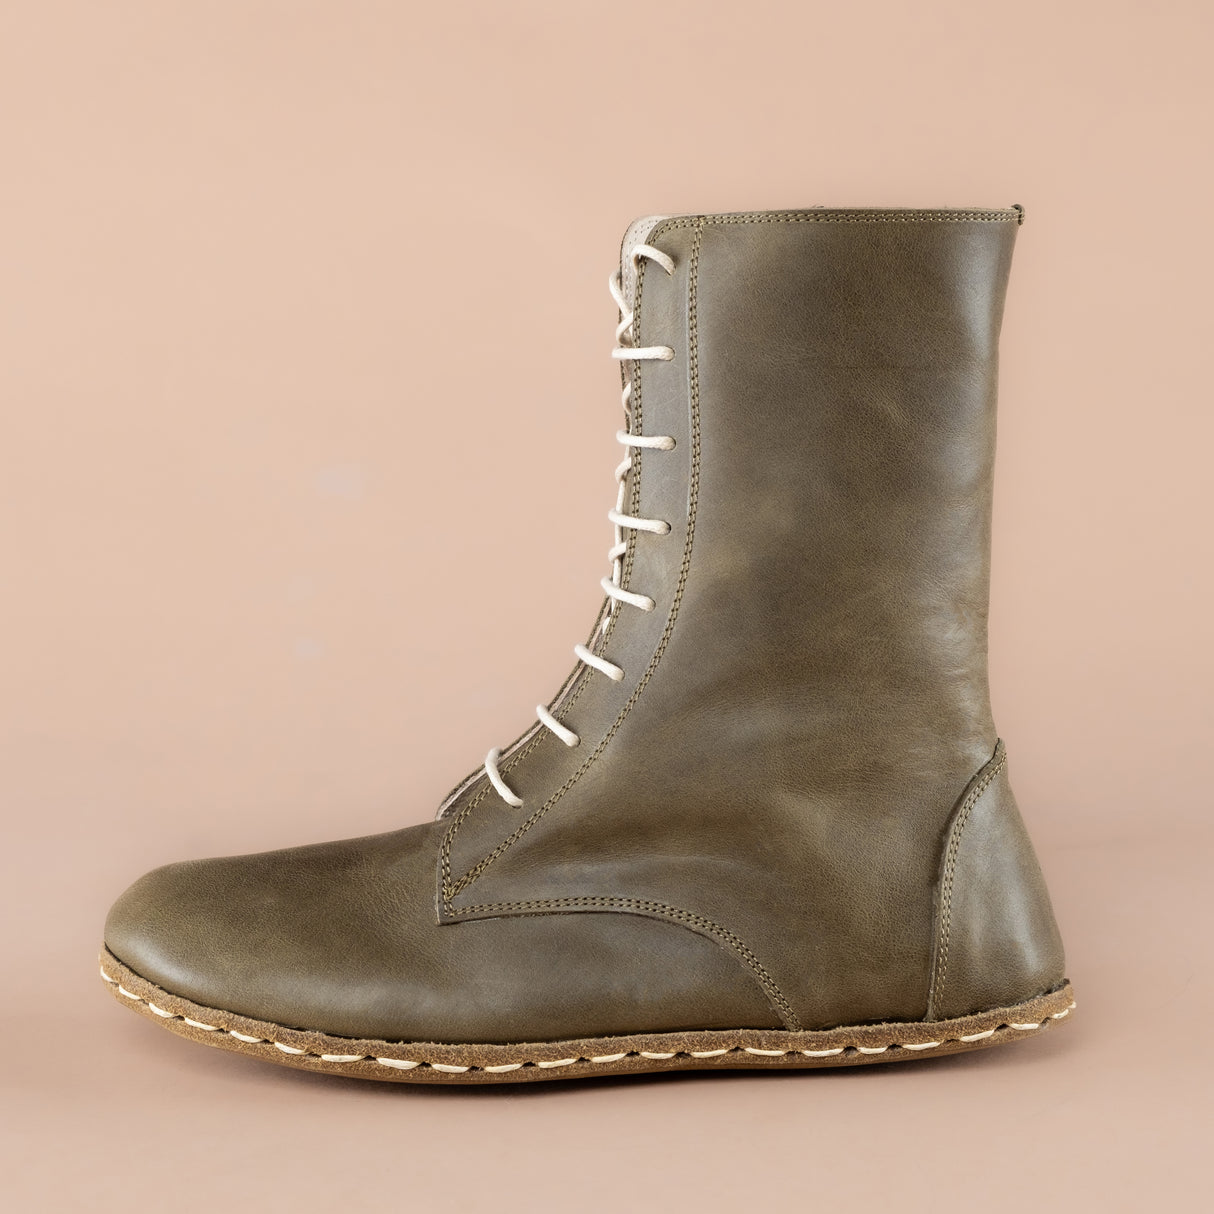 Men's Green Barefoot High Ankle Boots